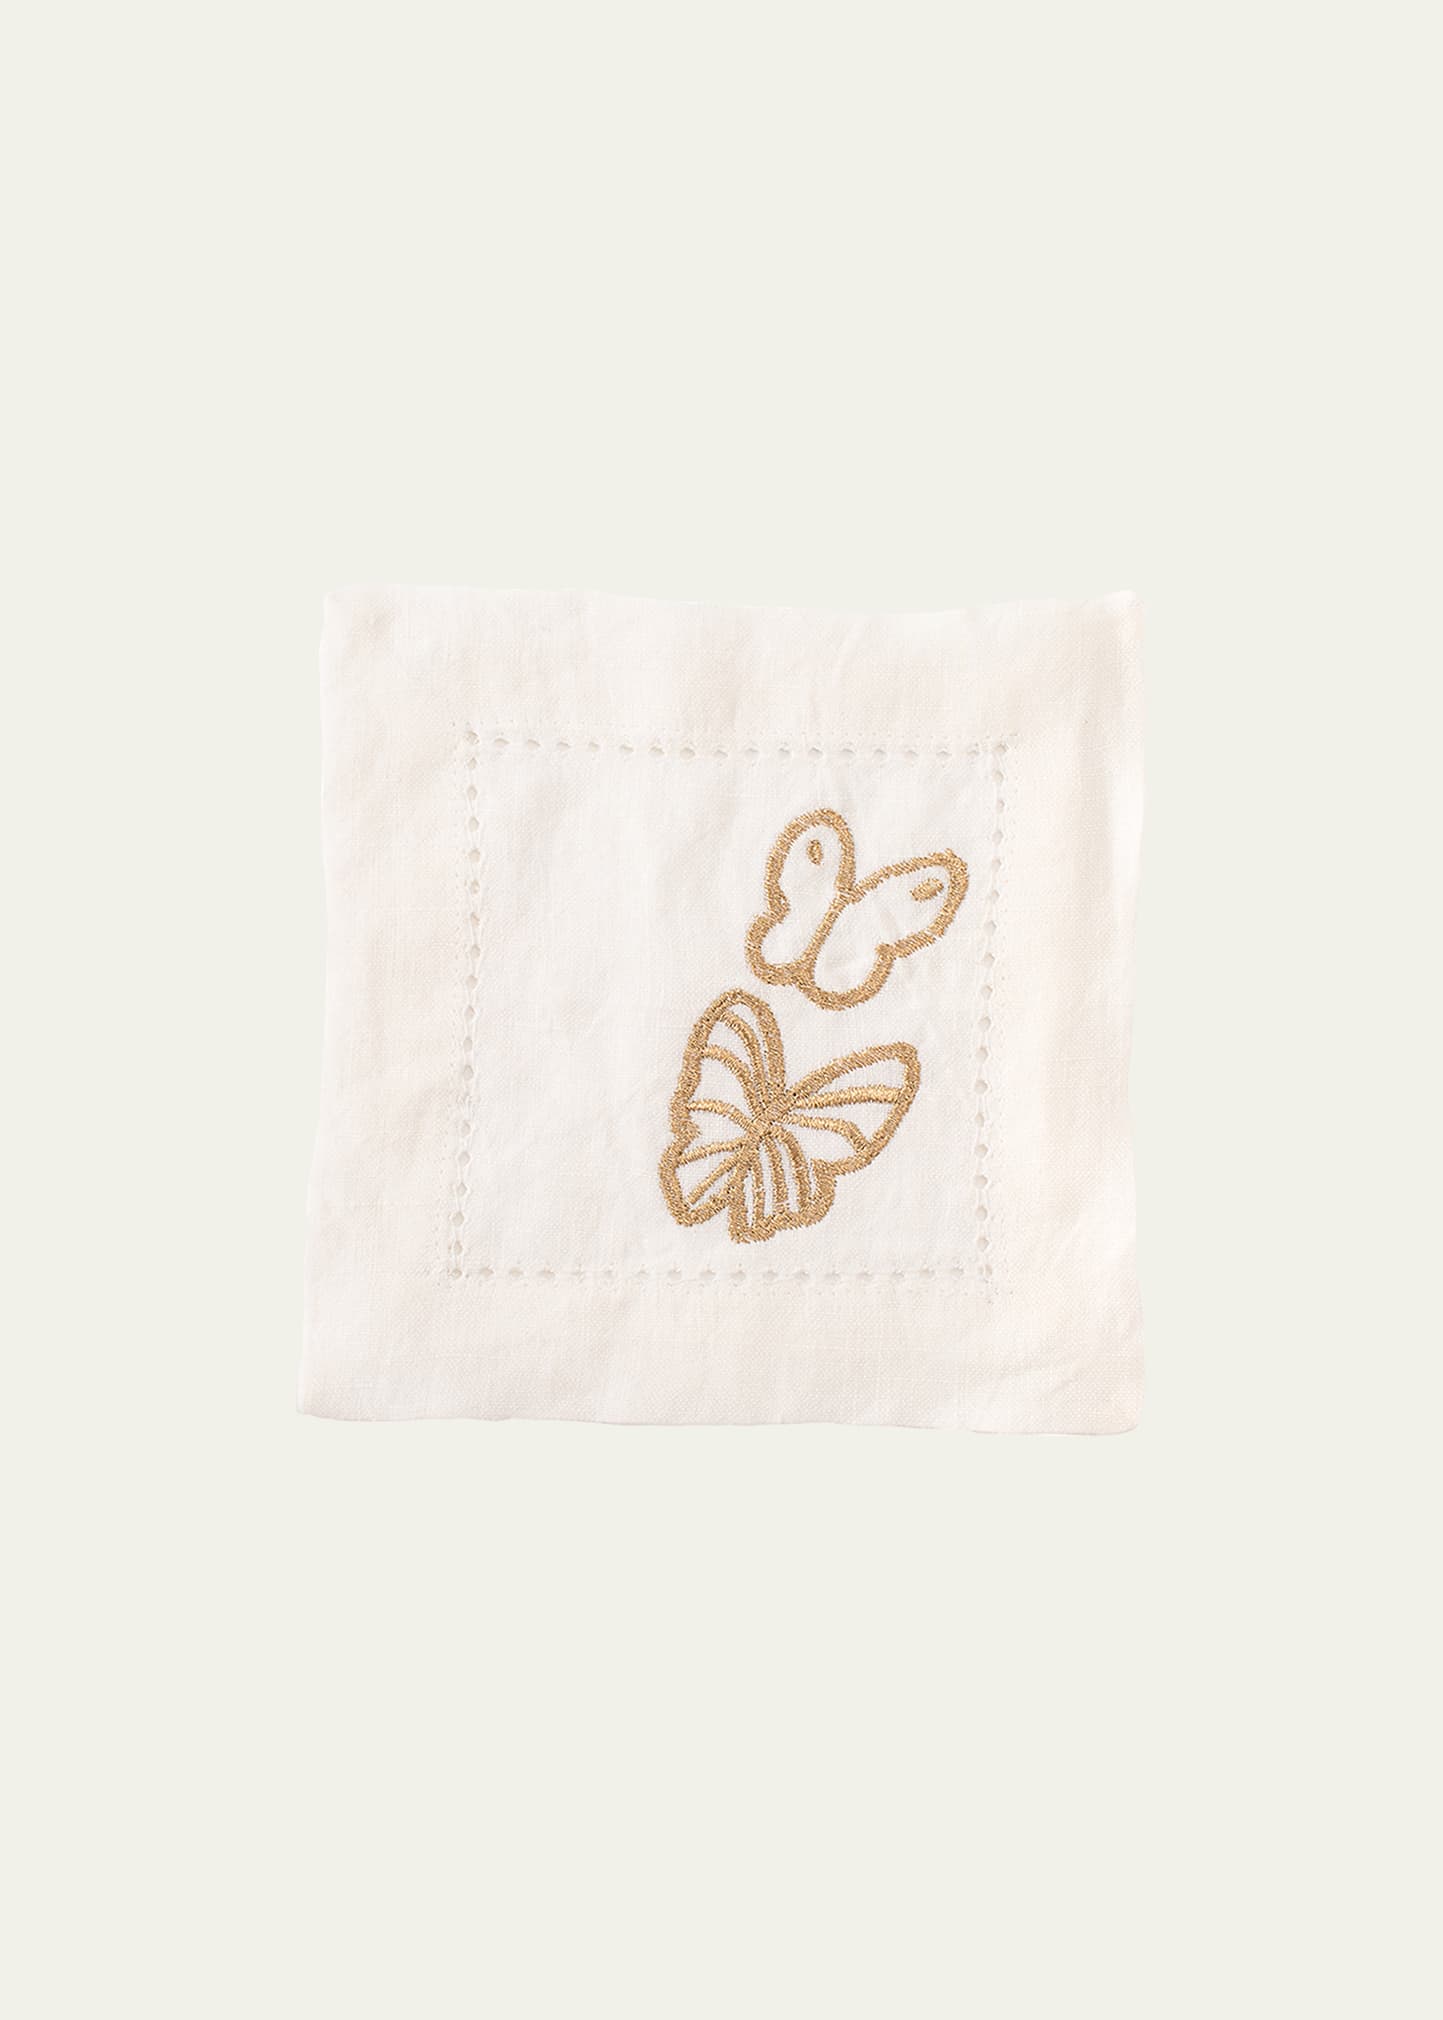 Painted Butterfly Embroidered Linen Cocktail Napkins, Set of 6